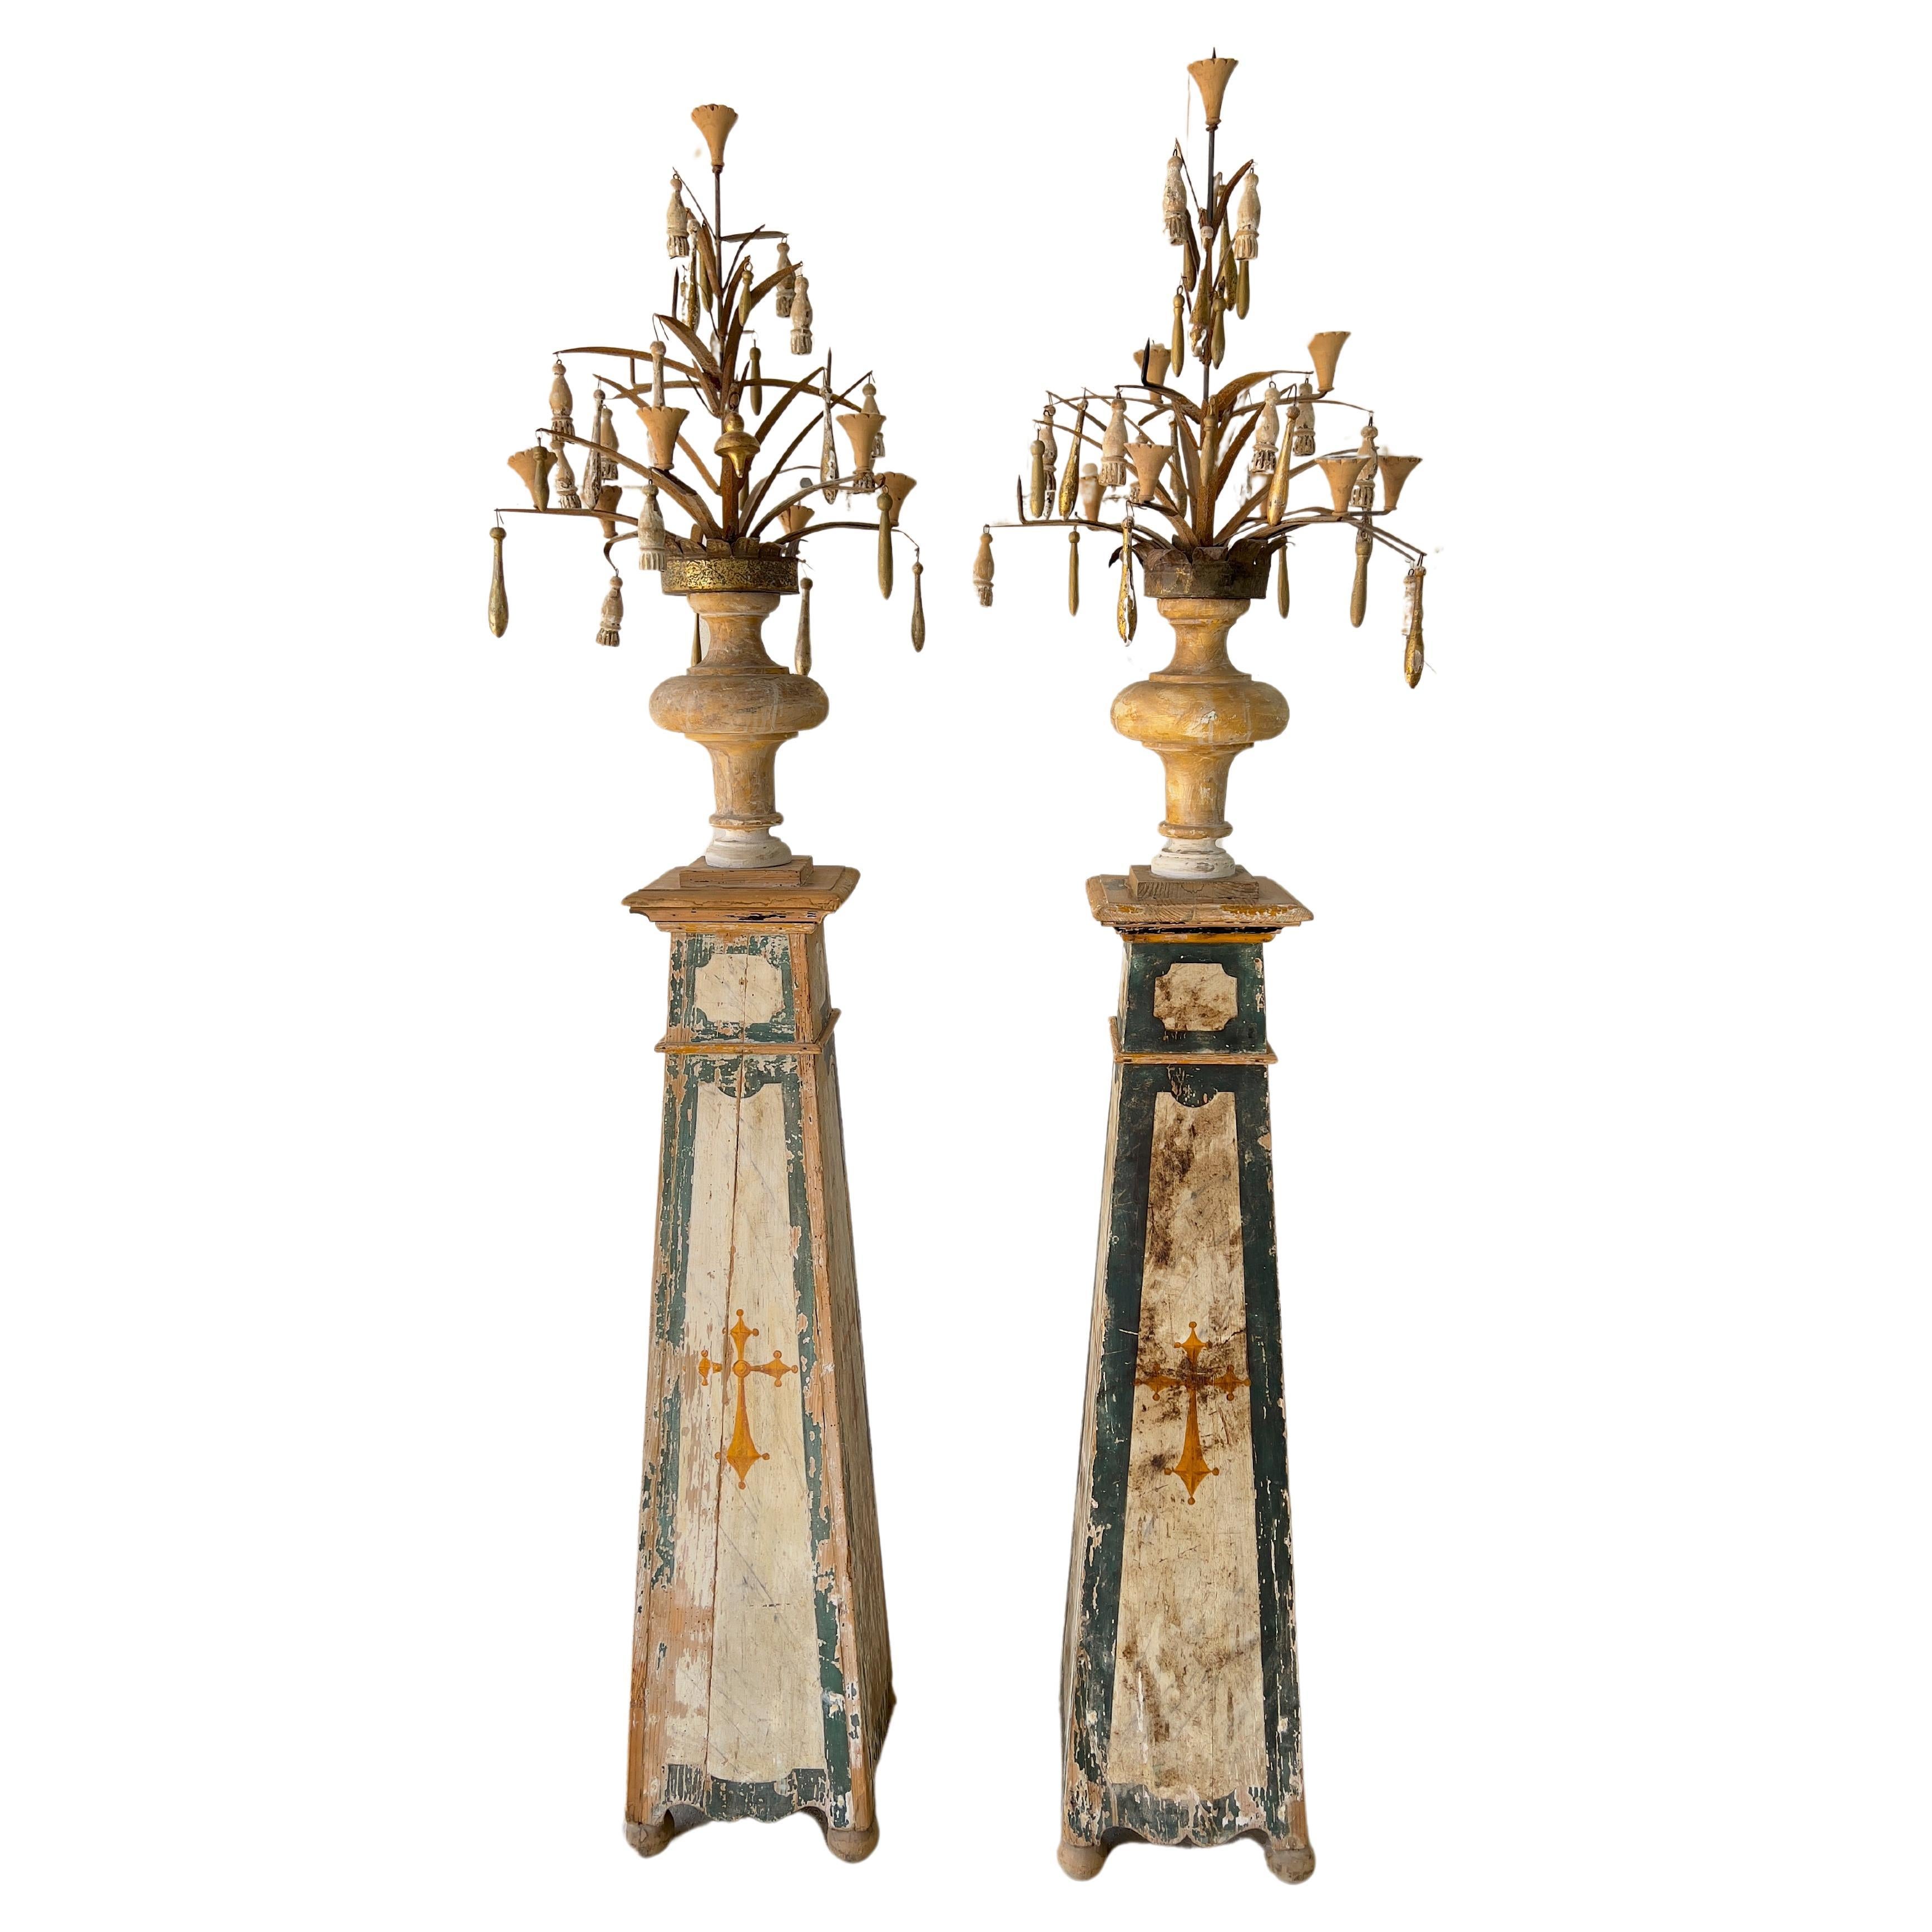 1750s Candle Holders